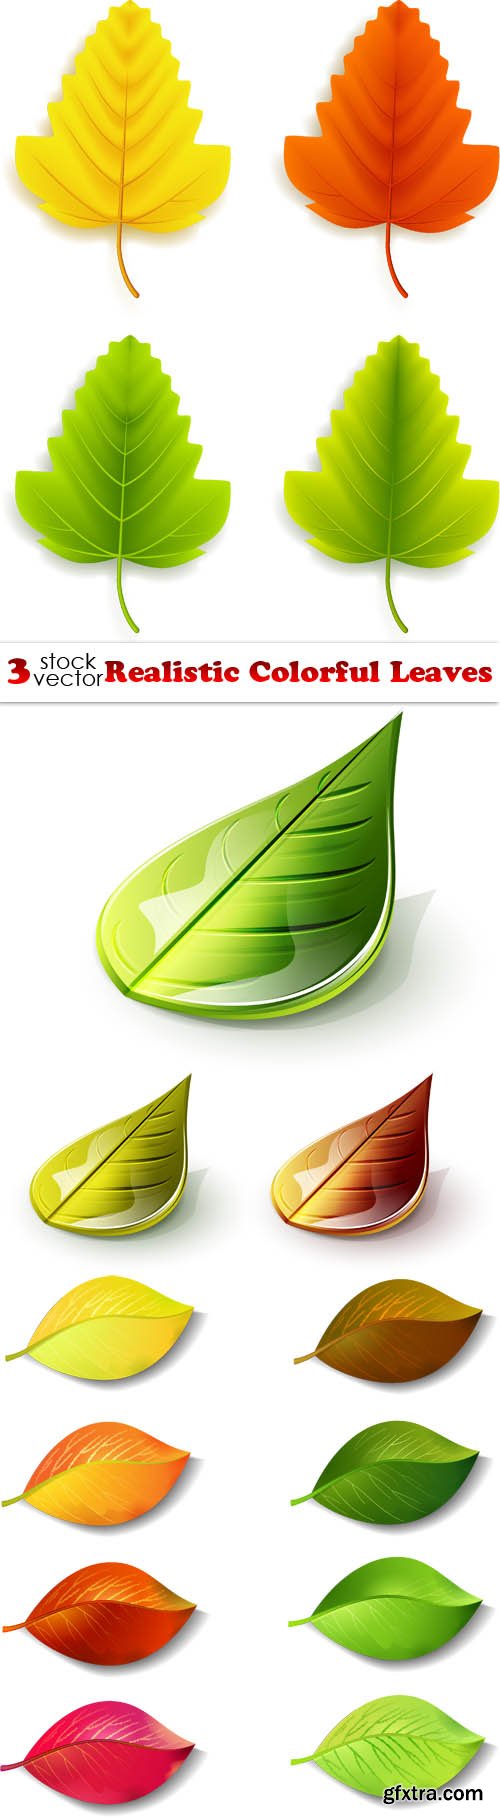 Vectors - Realistic Colorful Leaves